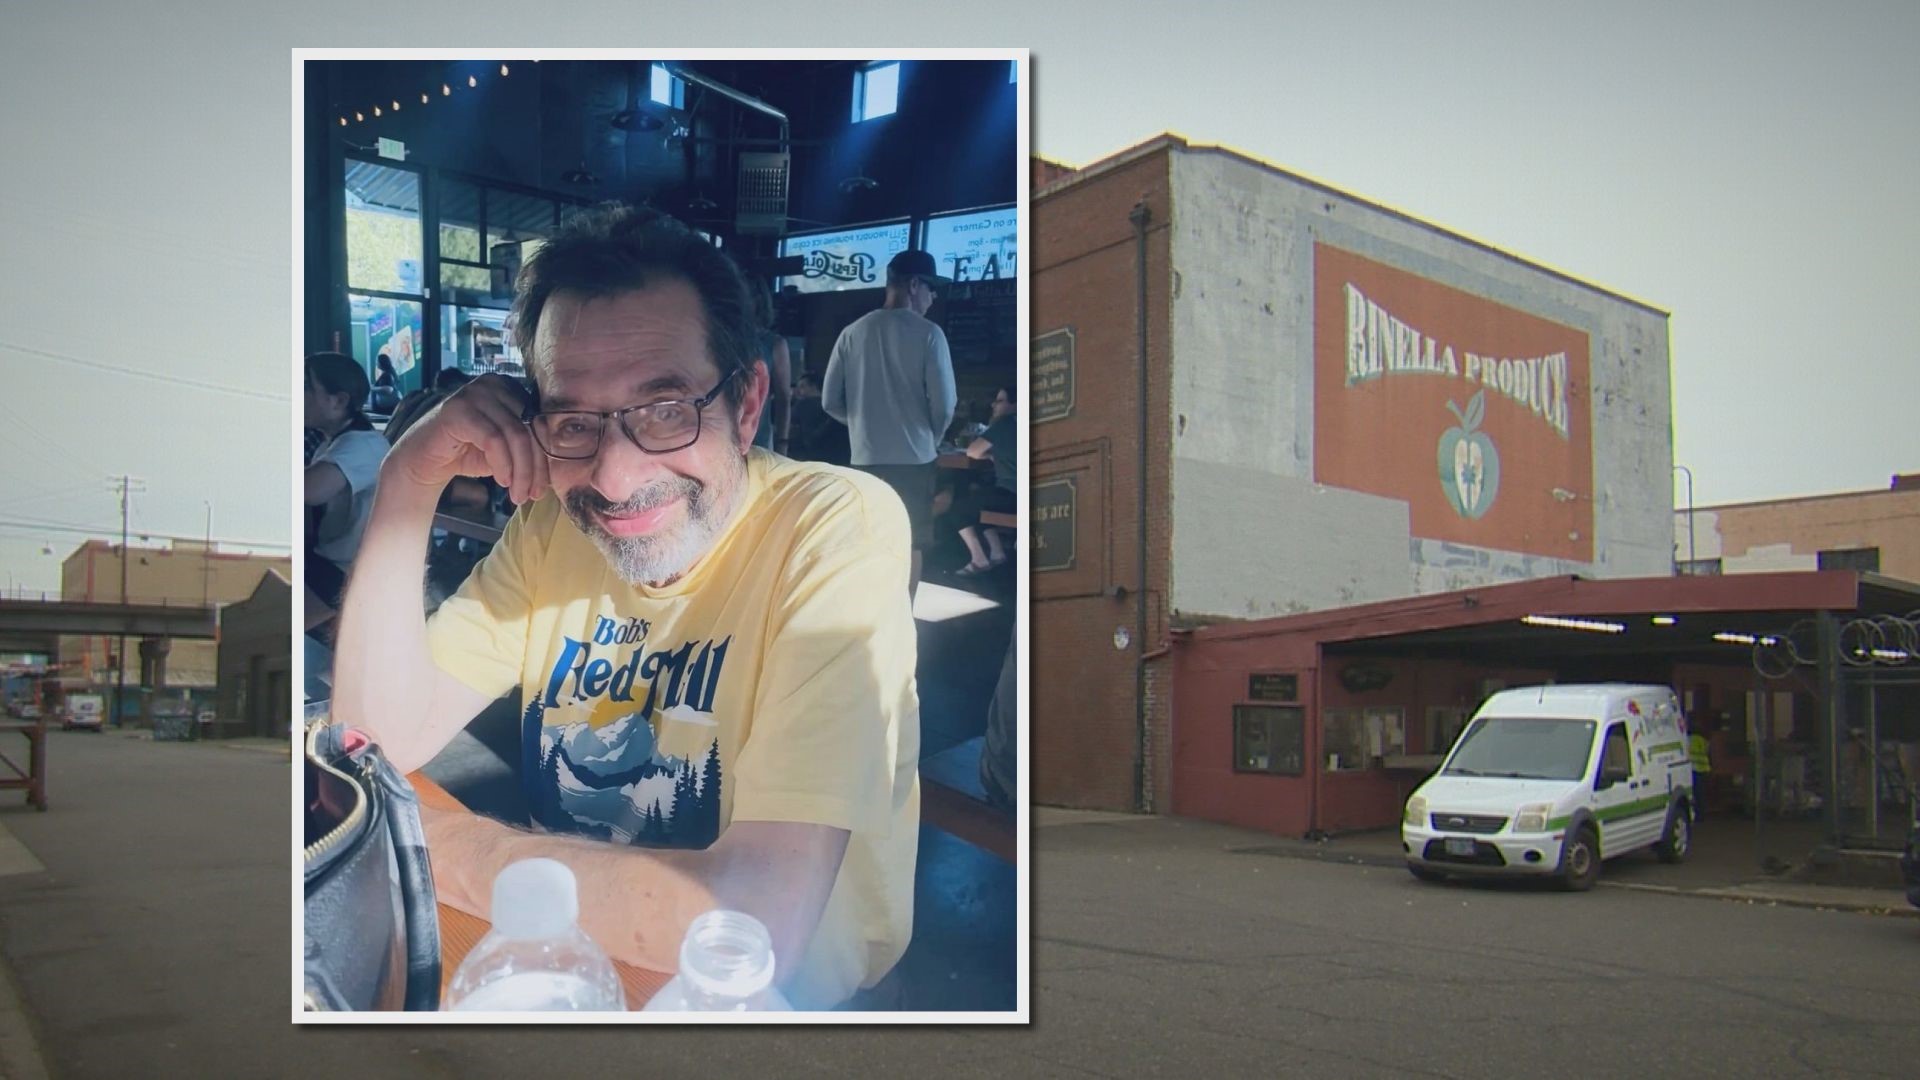 David Rinella, owner of Rinella Produce in the Central Eastside, tried to stop two people breaking into his car. They beat him until a police officer intervened.